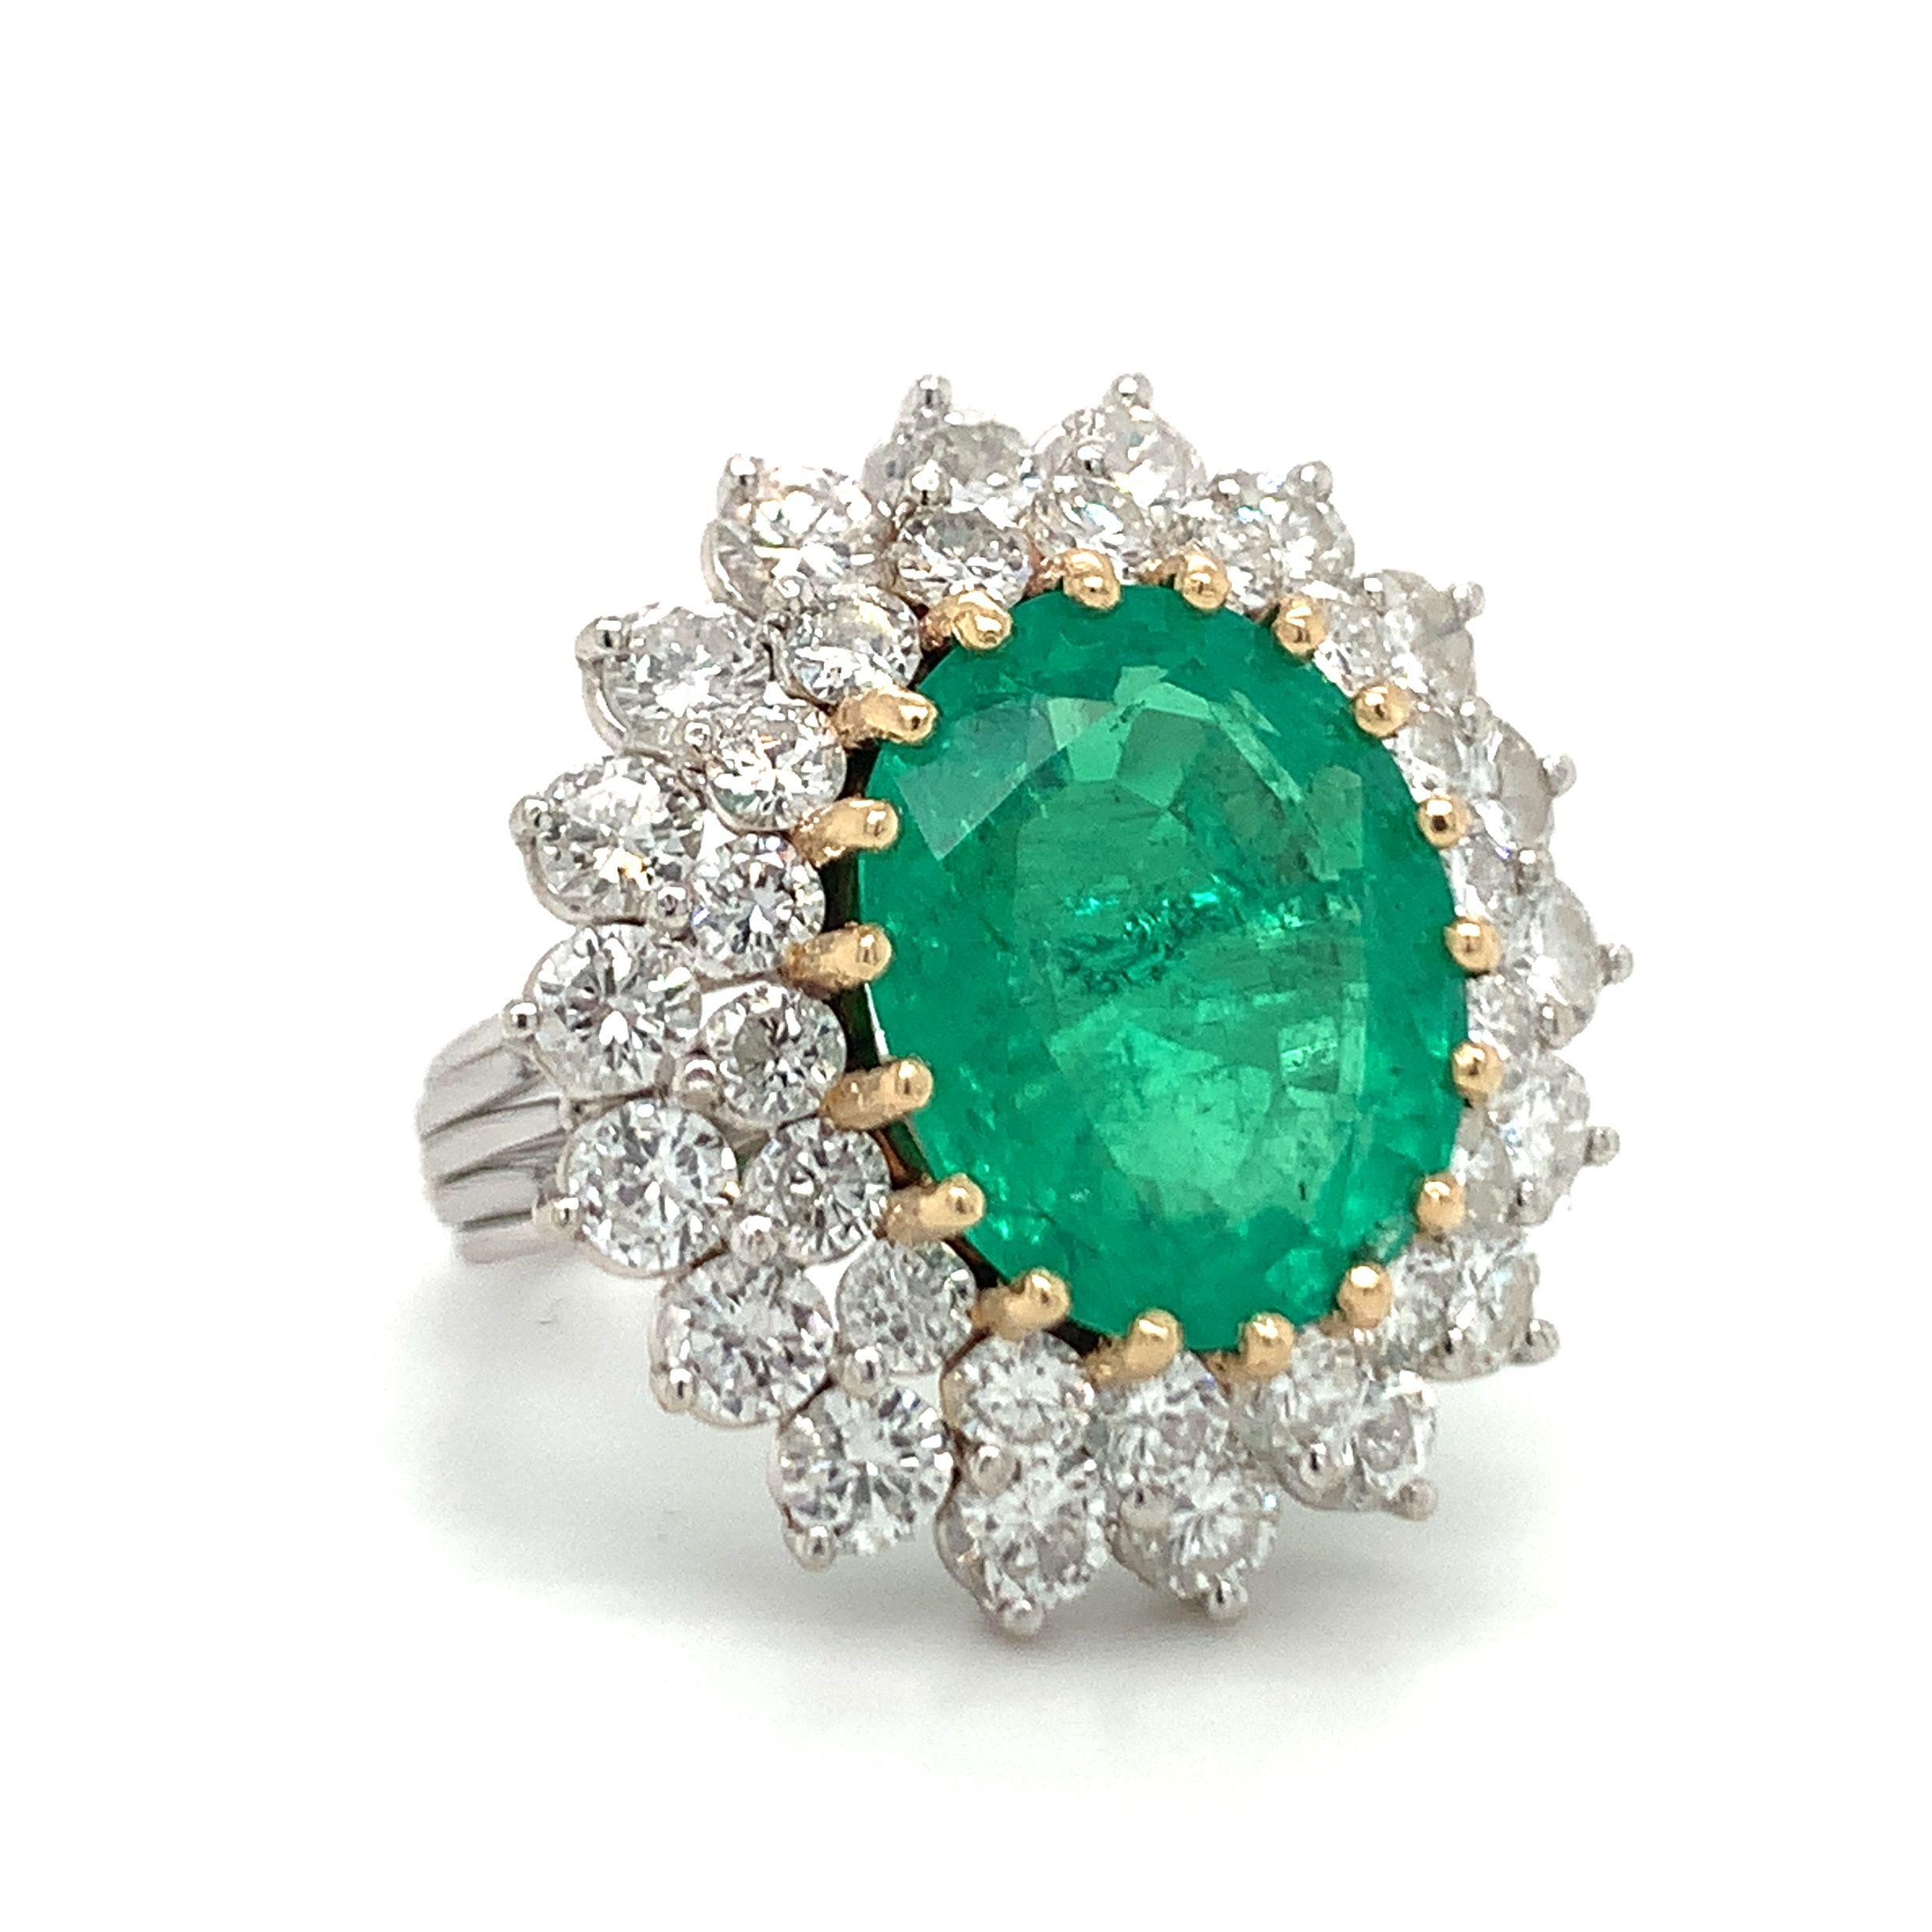 Emerald and diamond ring designed in 14K white gold featuring one yellow gold prong set, oval brilliant cut emerald weighing 6 ct. The emerald is surrounded by 36 round brilliant cut diamonds weighing 3 ct. with a G-H color and VS-2, SI-1